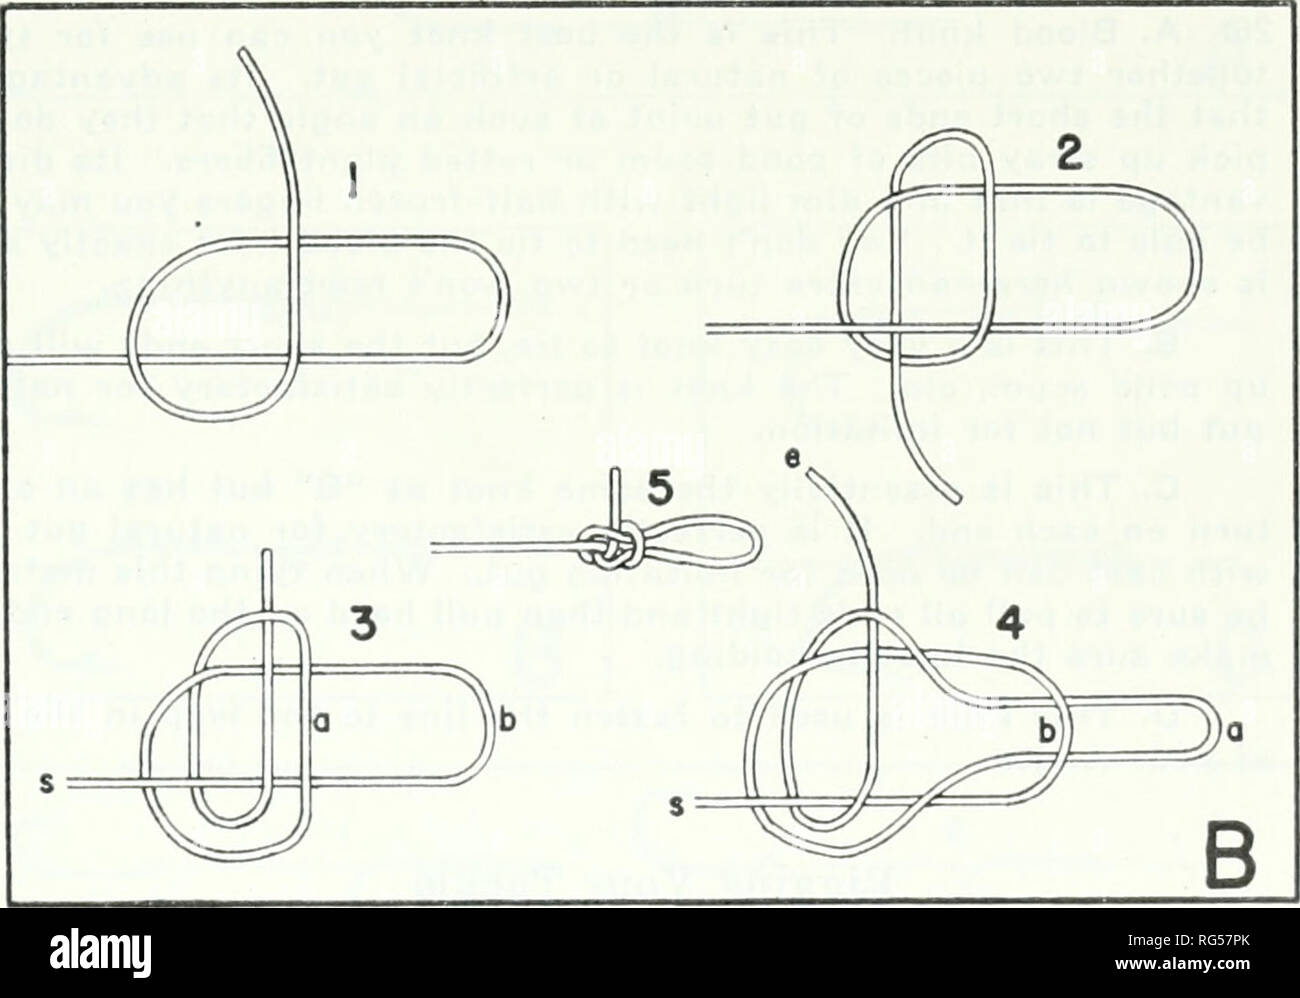 . California fish and game. Fisheries -- California; Game and game-birds -- California; Fishes -- California; Animal Population Groups; Pêches; Gibier; Poissons. C.RC. Fig. 25. Loop knots. Both are suitable for either natural or imitation gut. A. Loop the end of your leader, tie an ordinary overhand knot with the doubled part, then pass the doubled end through the loop a second time and pull tight. B. When you reach stage 3, hold as much of the knot as possi- ble between thumb and forefinger to prevent slipping, then grasp loop &quot;a&quot; and pull under &quot;b,&quot; thus reaching stage 4. Stock Photo